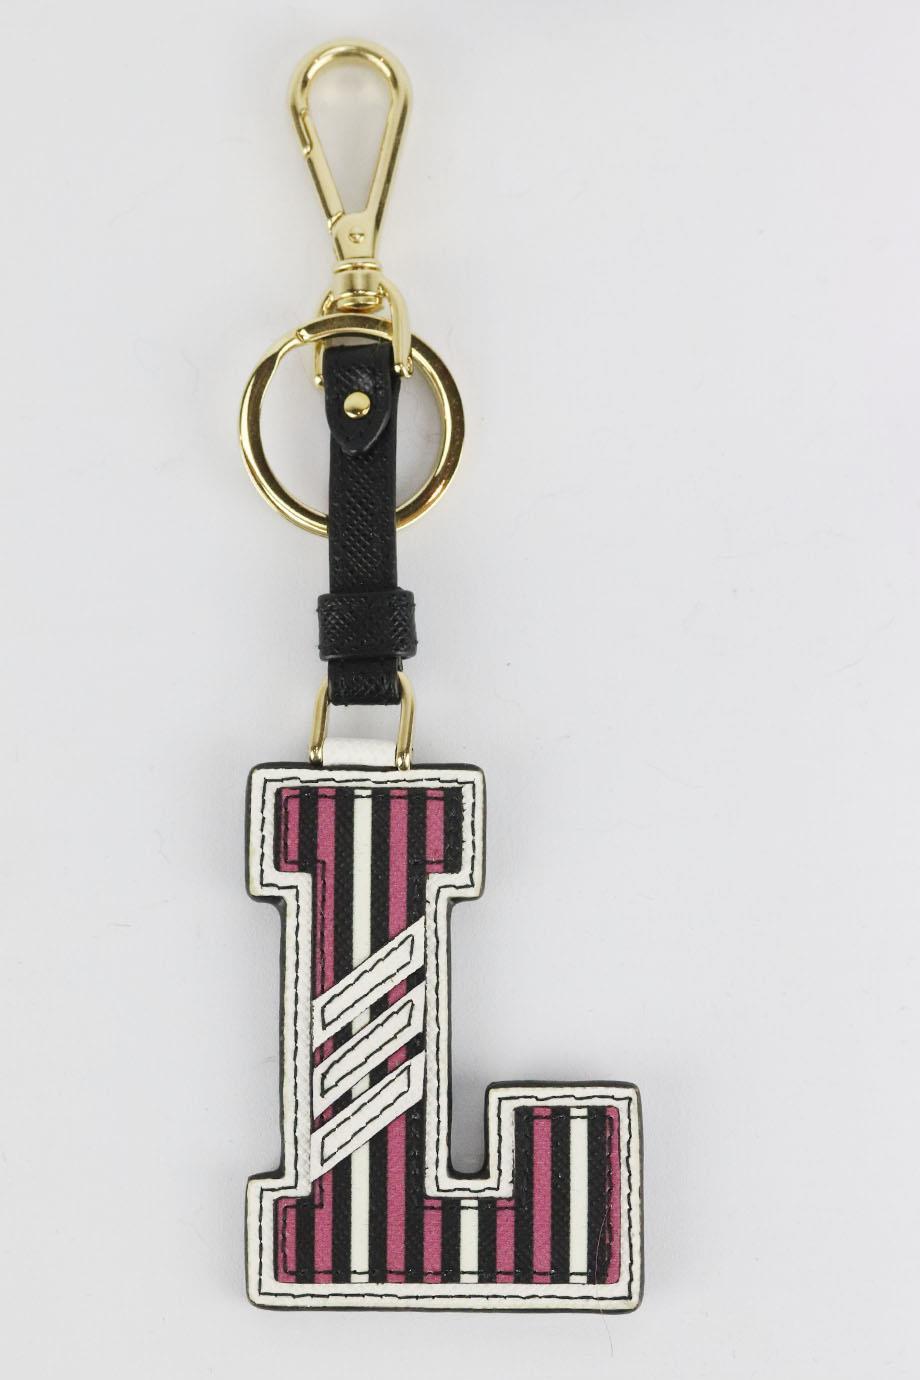 Prada 'L' initial printed textured leather bag charm. Pink, white and black. Lobster clasp fastening at top. Does not come with dustbag or box. Height: 7 in. Width: 2.1 in
